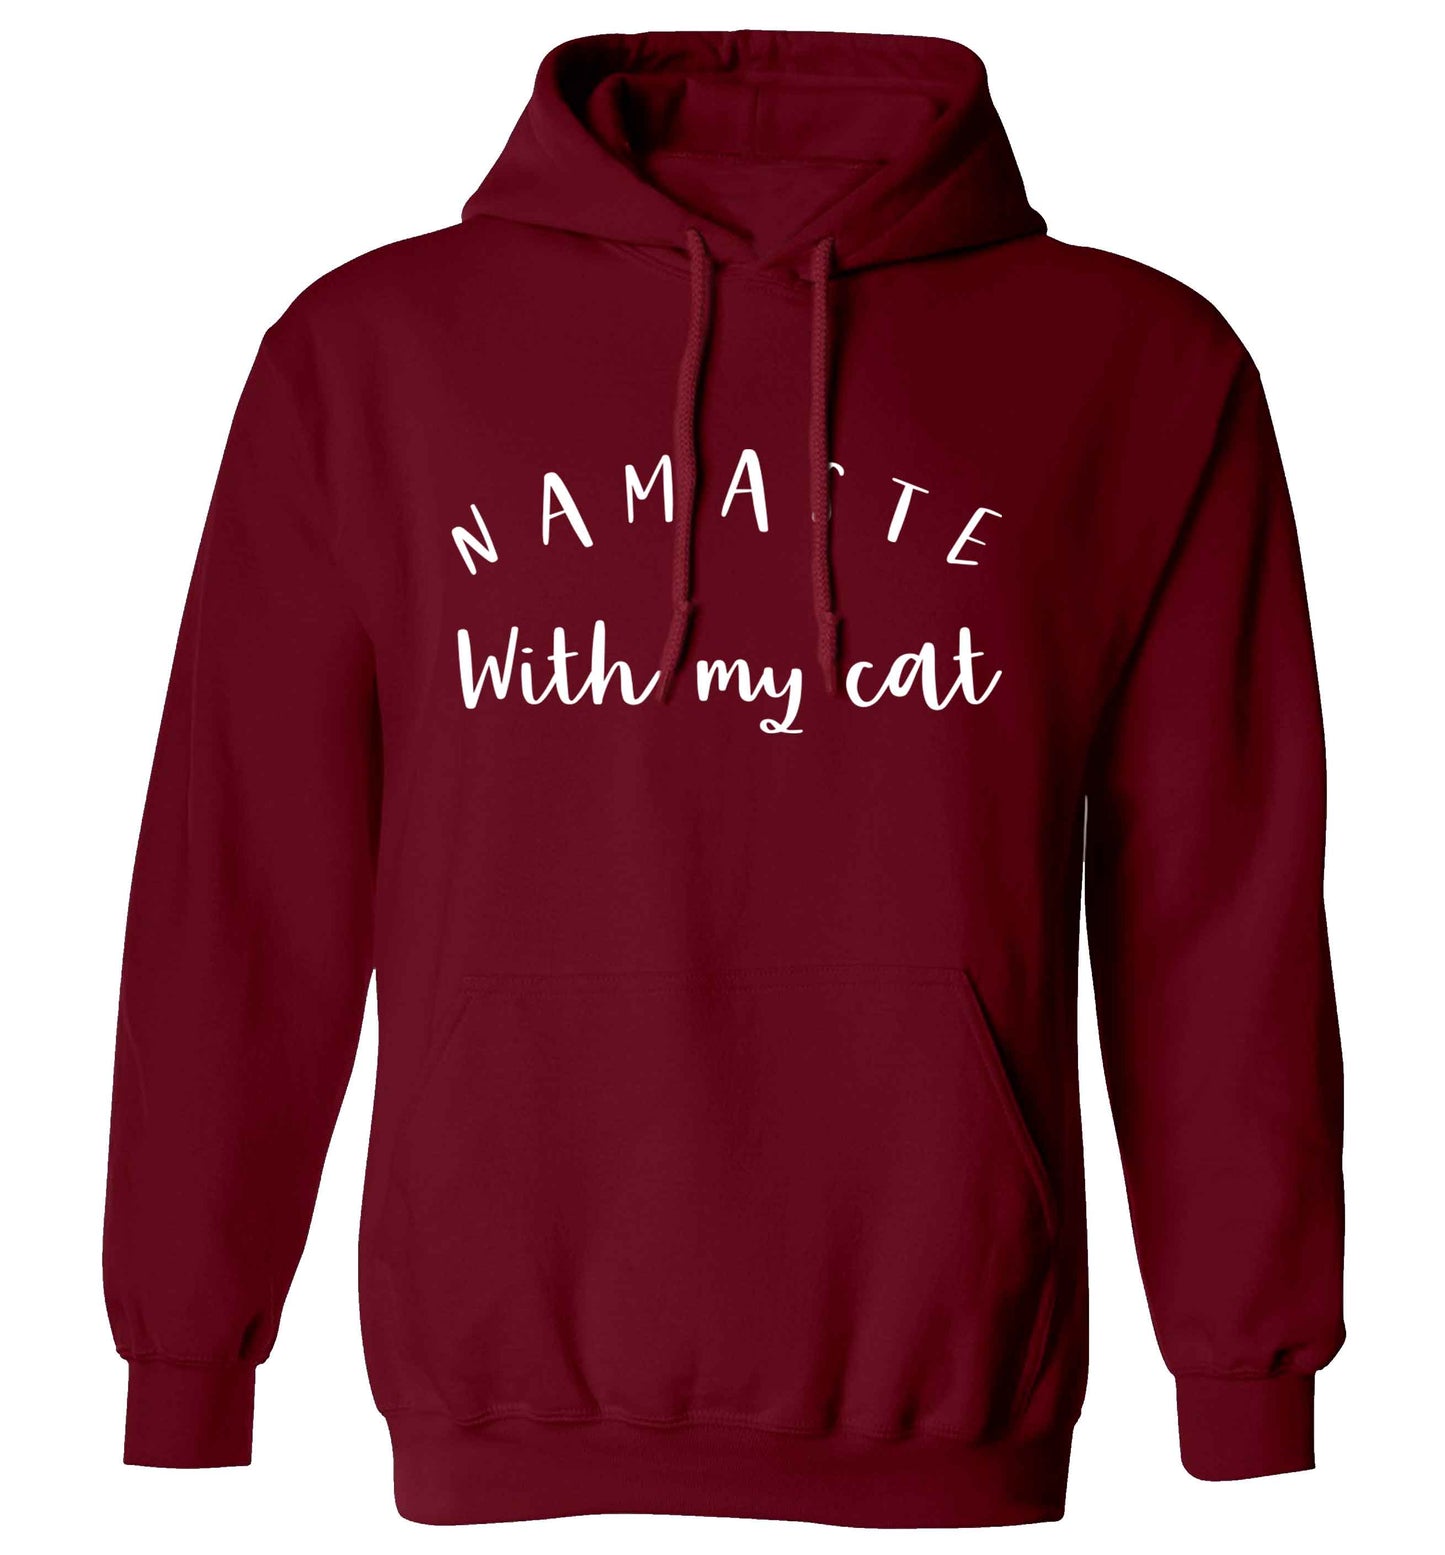 Namaste with my cat adults unisex maroon hoodie 2XL